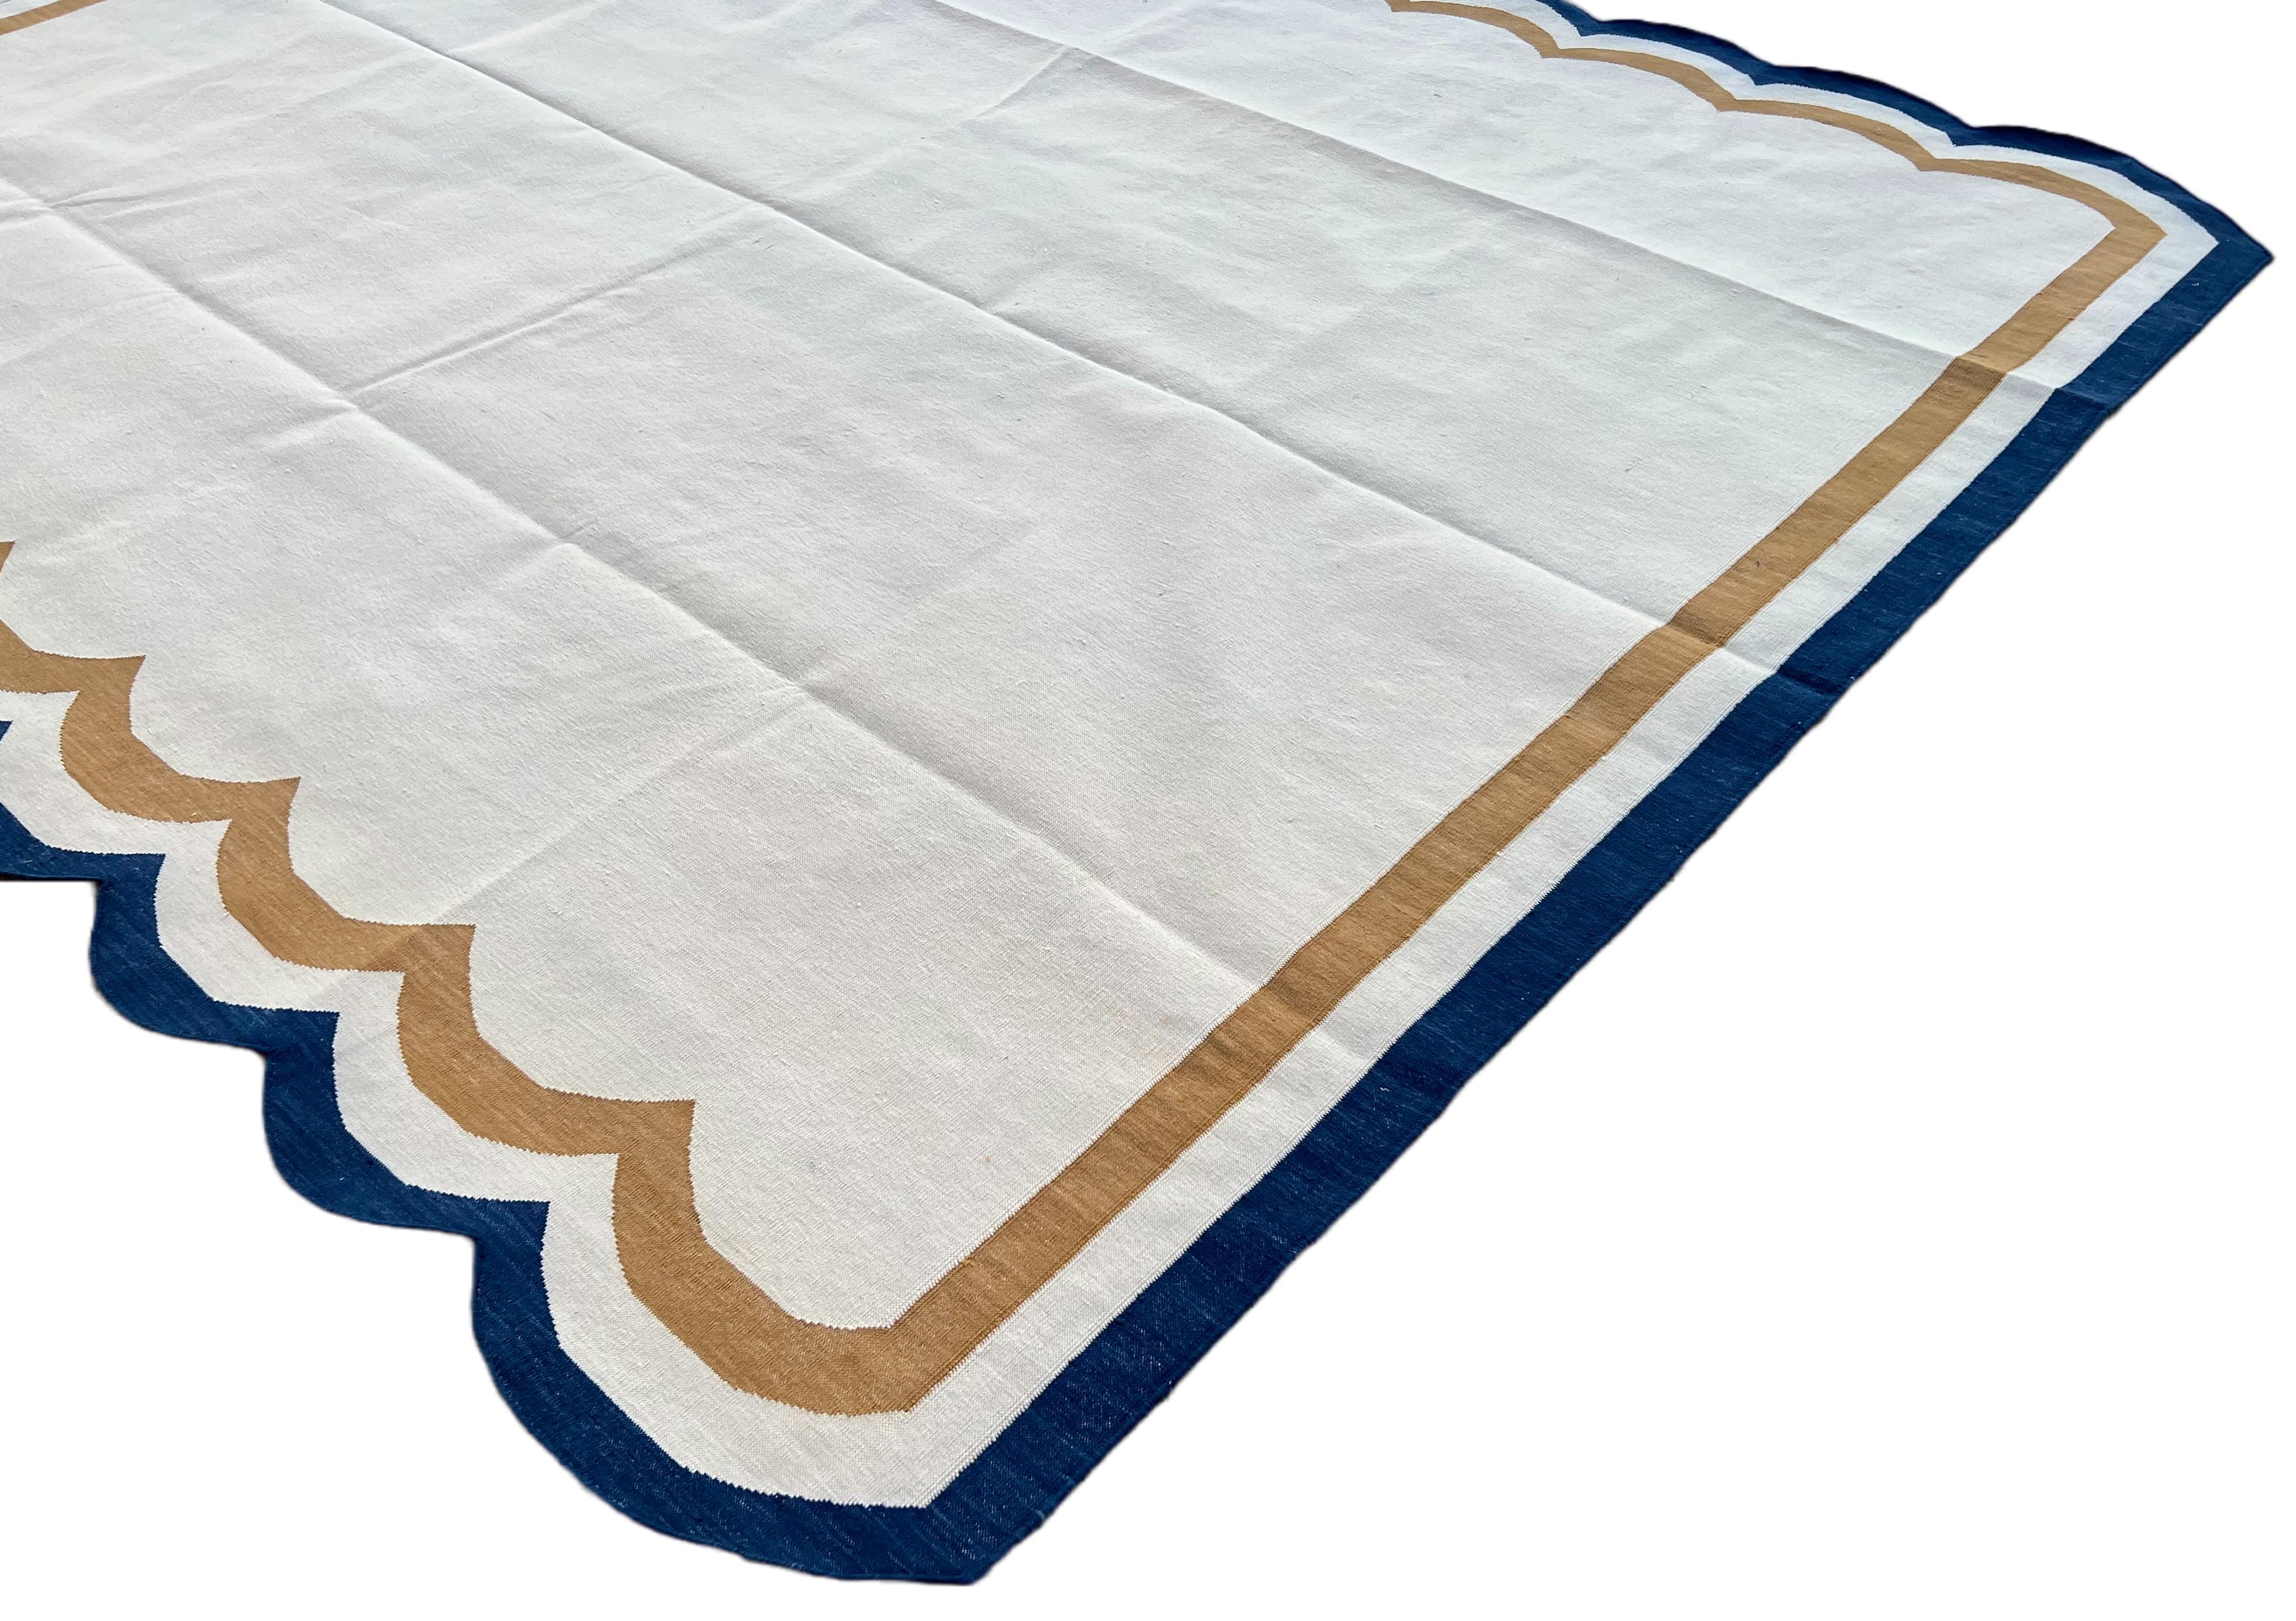 Indian Handmade Cotton Area Flat Weave Rug, 8x10 Cream And Blue Scallop Striped Dhurrie For Sale